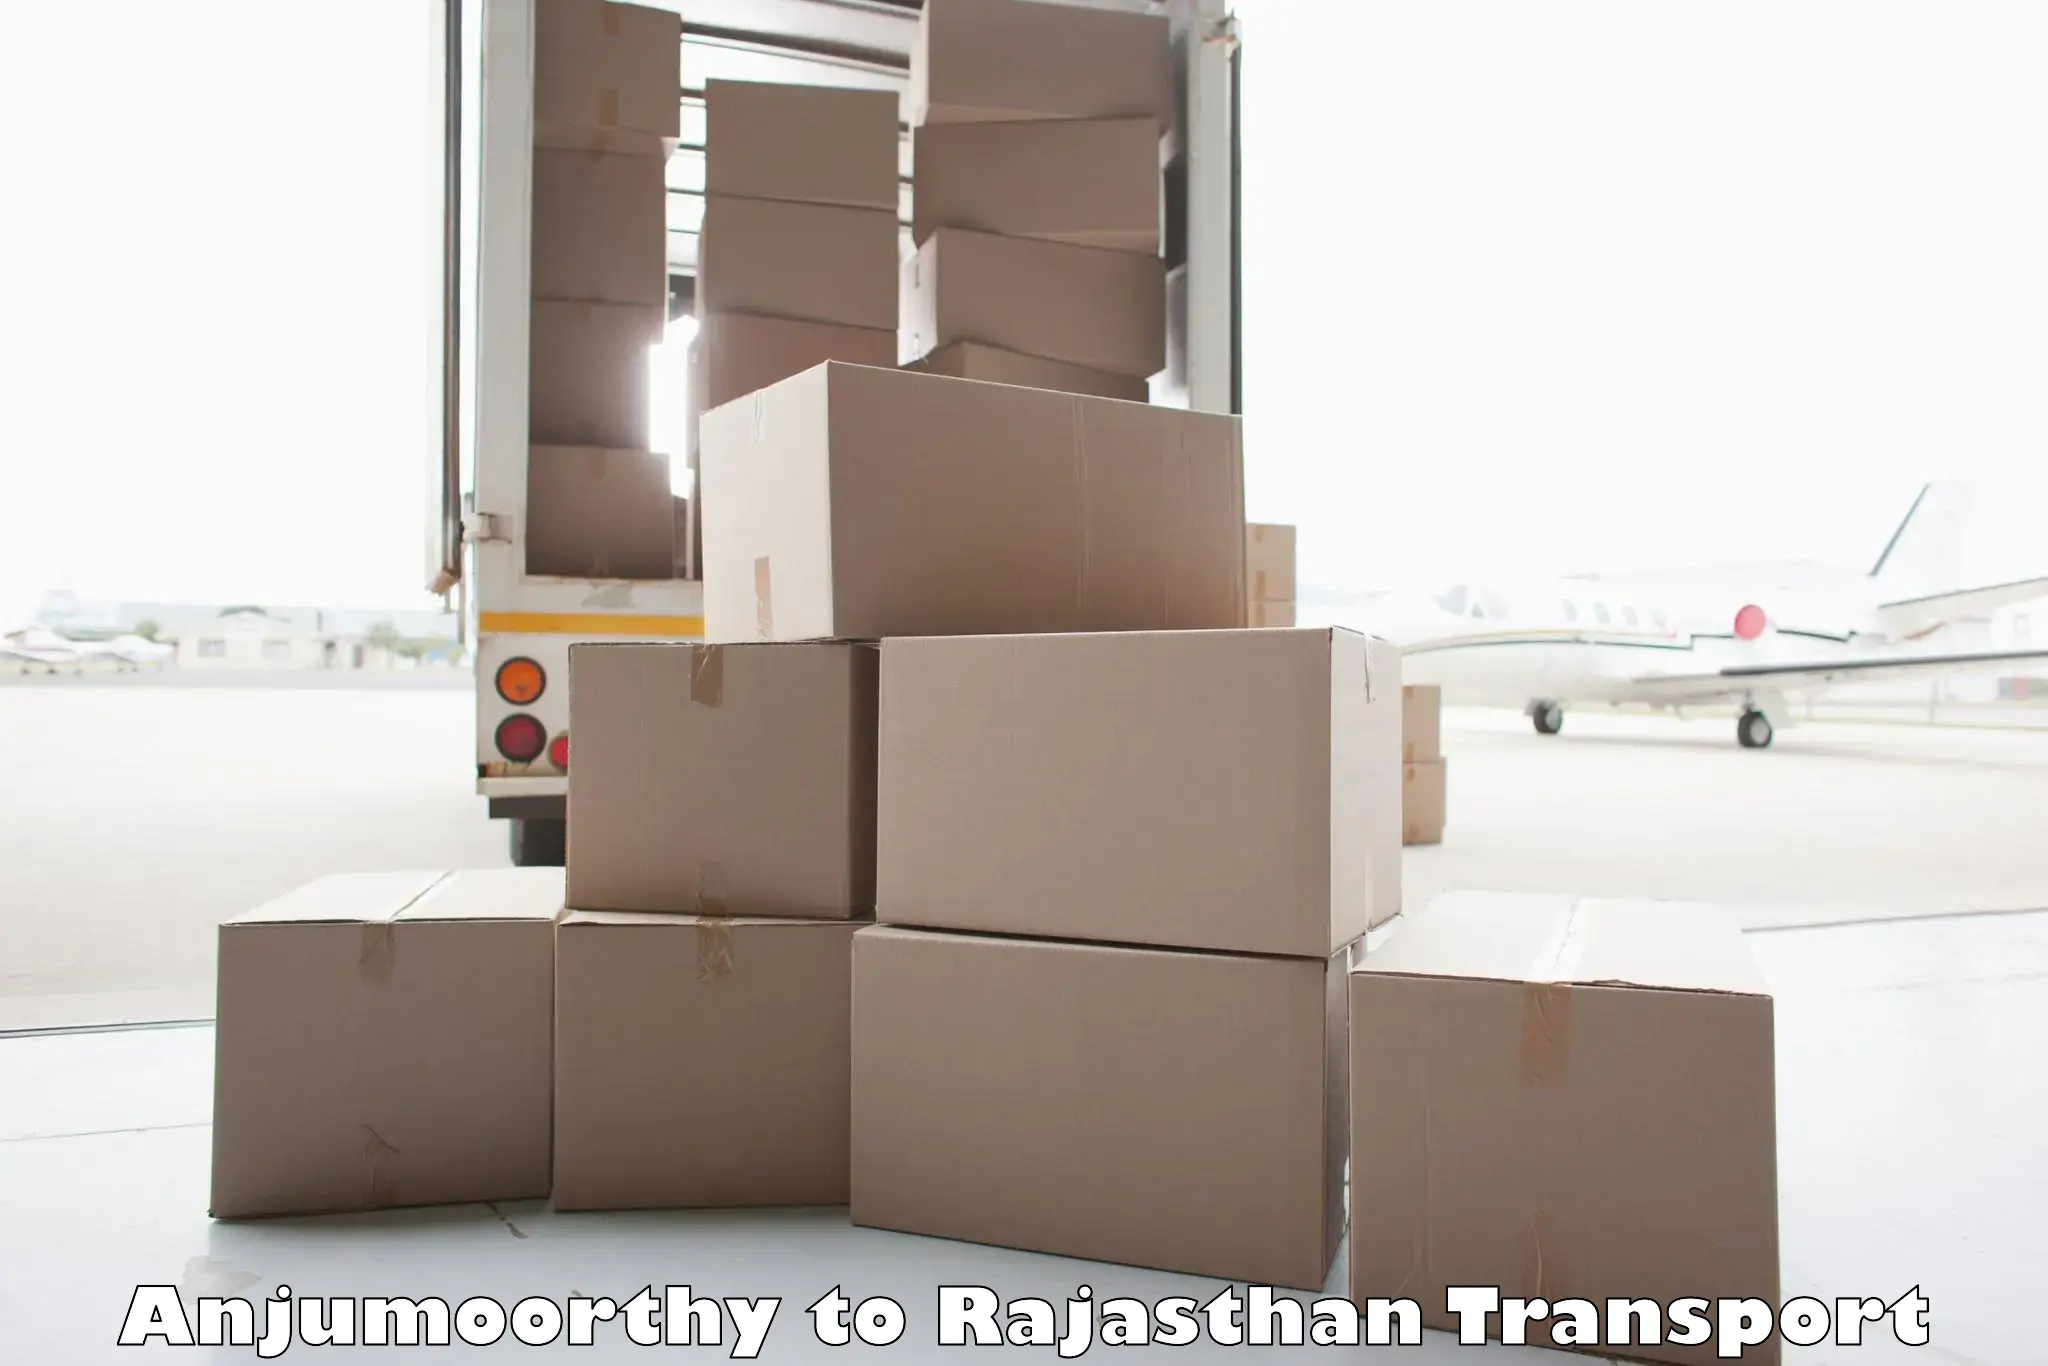 Part load transport service in India Anjumoorthy to Chittorgarh